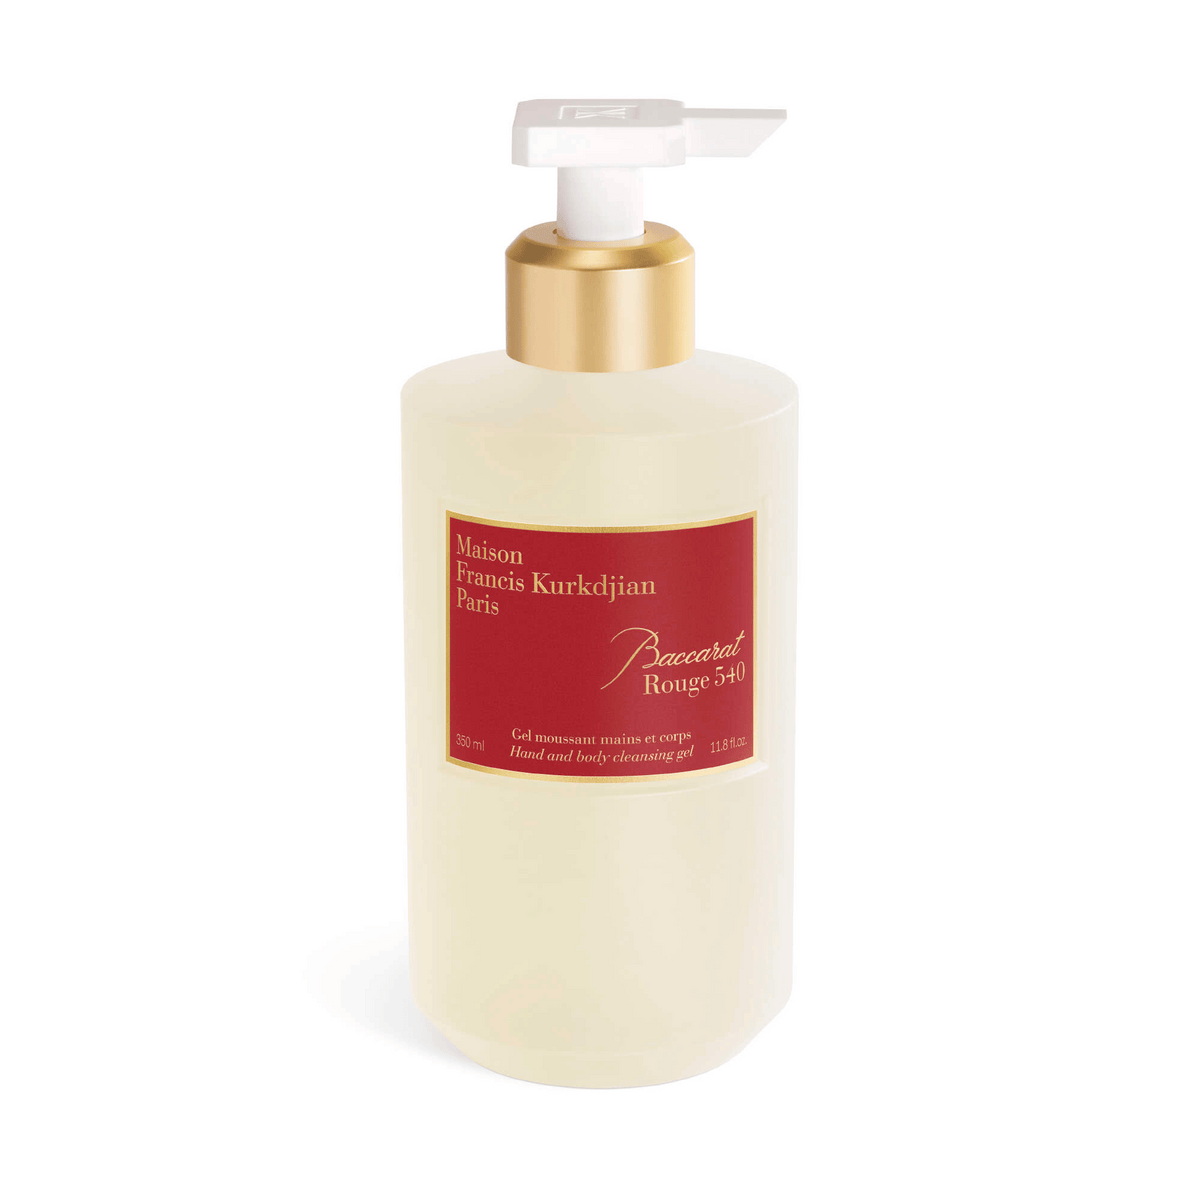 Primary Image of Hand and Body Cleansing Gel - Baccarat Rouge